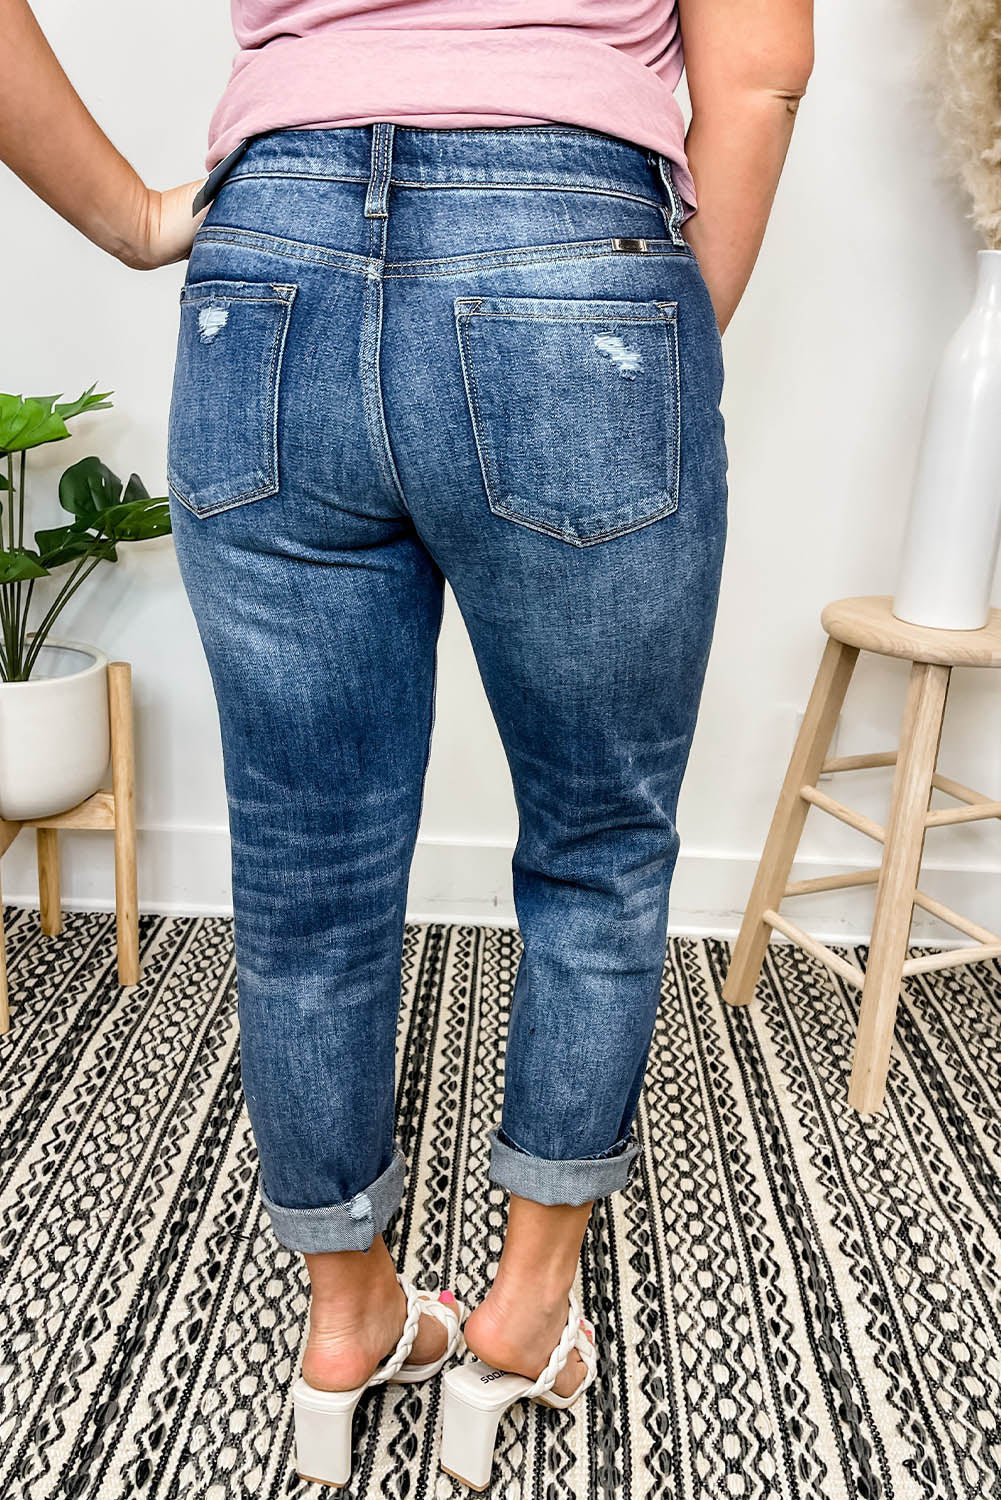 Call It Even Distressed Plus Size Denim Jeans